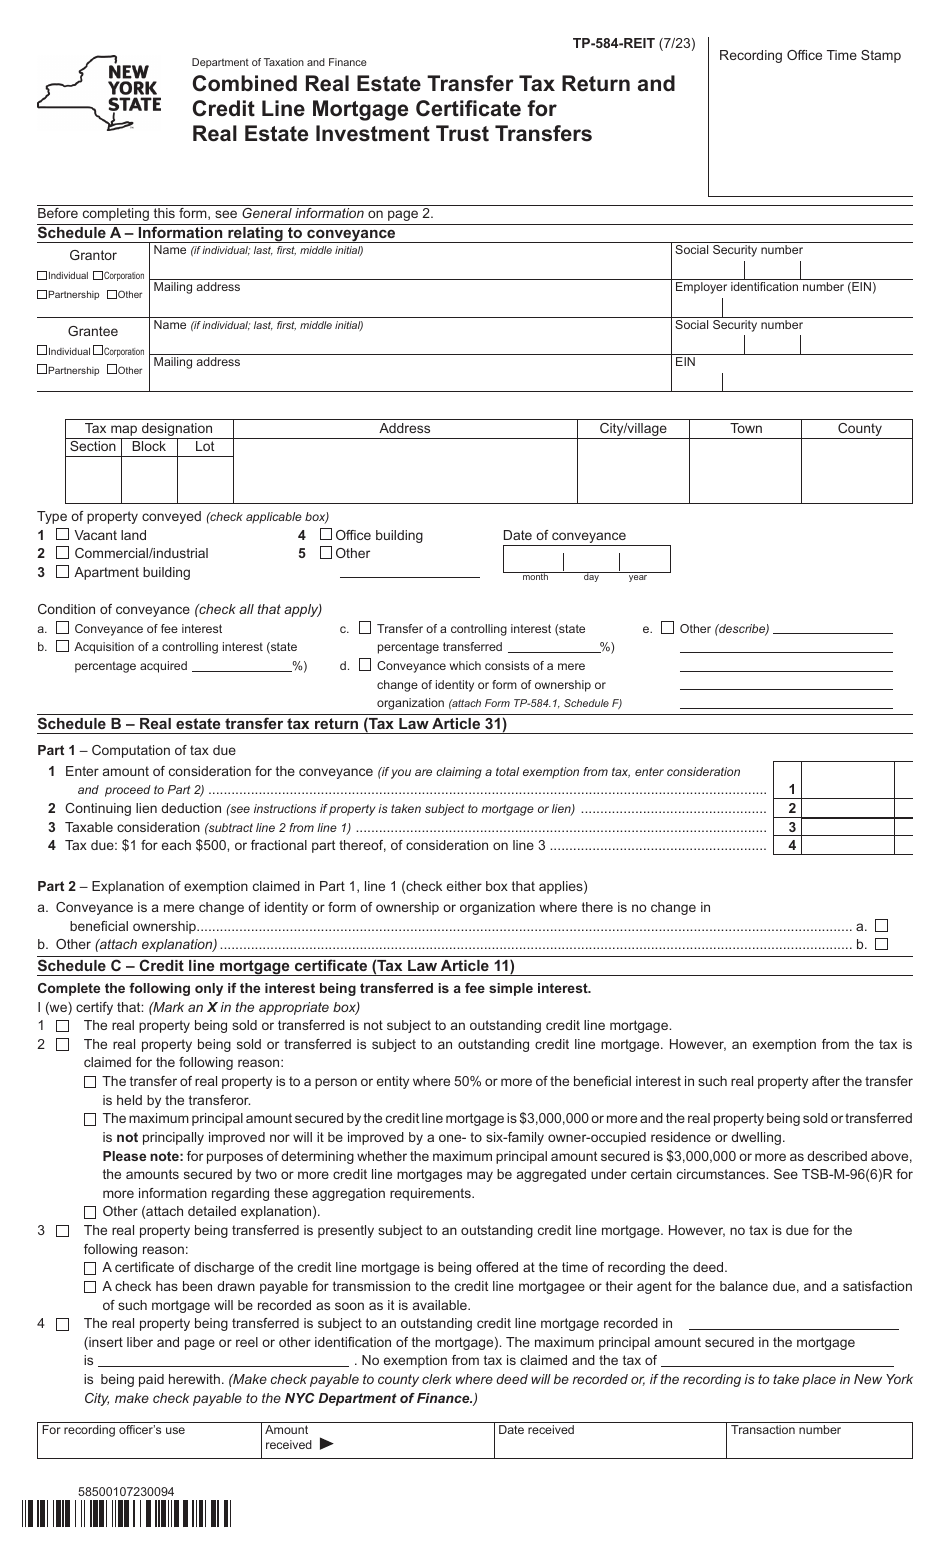 Form TP-584-REIT Download Printable PDF or Fill Online Combined Real ...